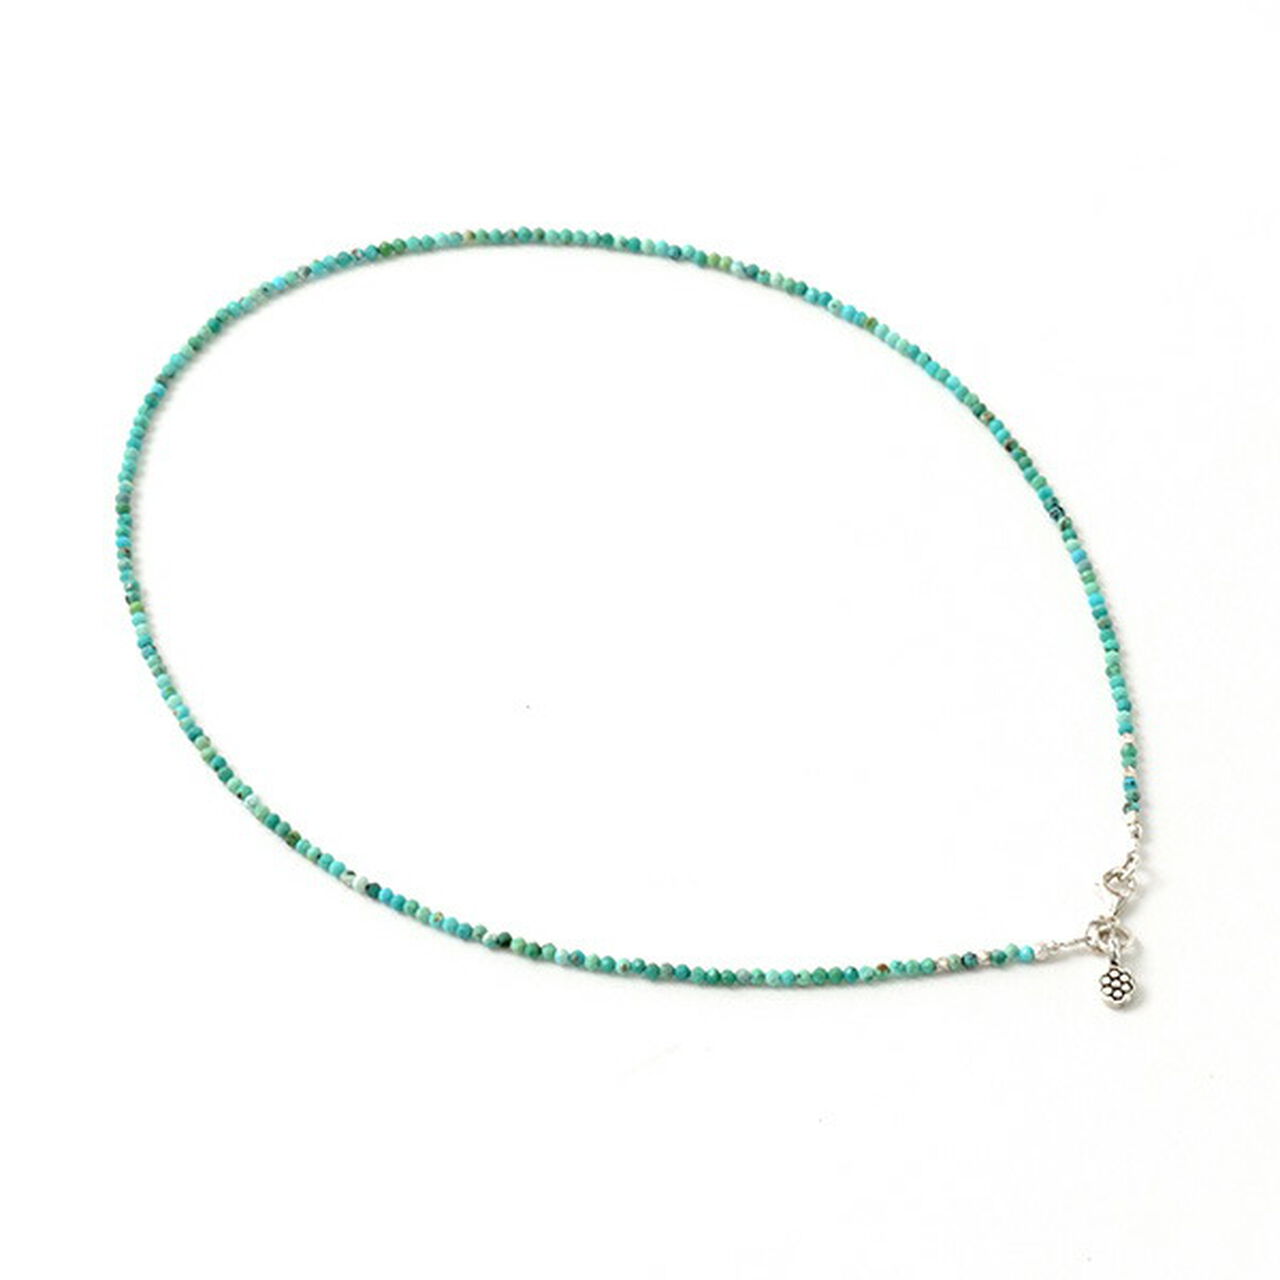 Turquoise 2mm Cut Beads Necklace / Anklet,Turquoise, large image number 0